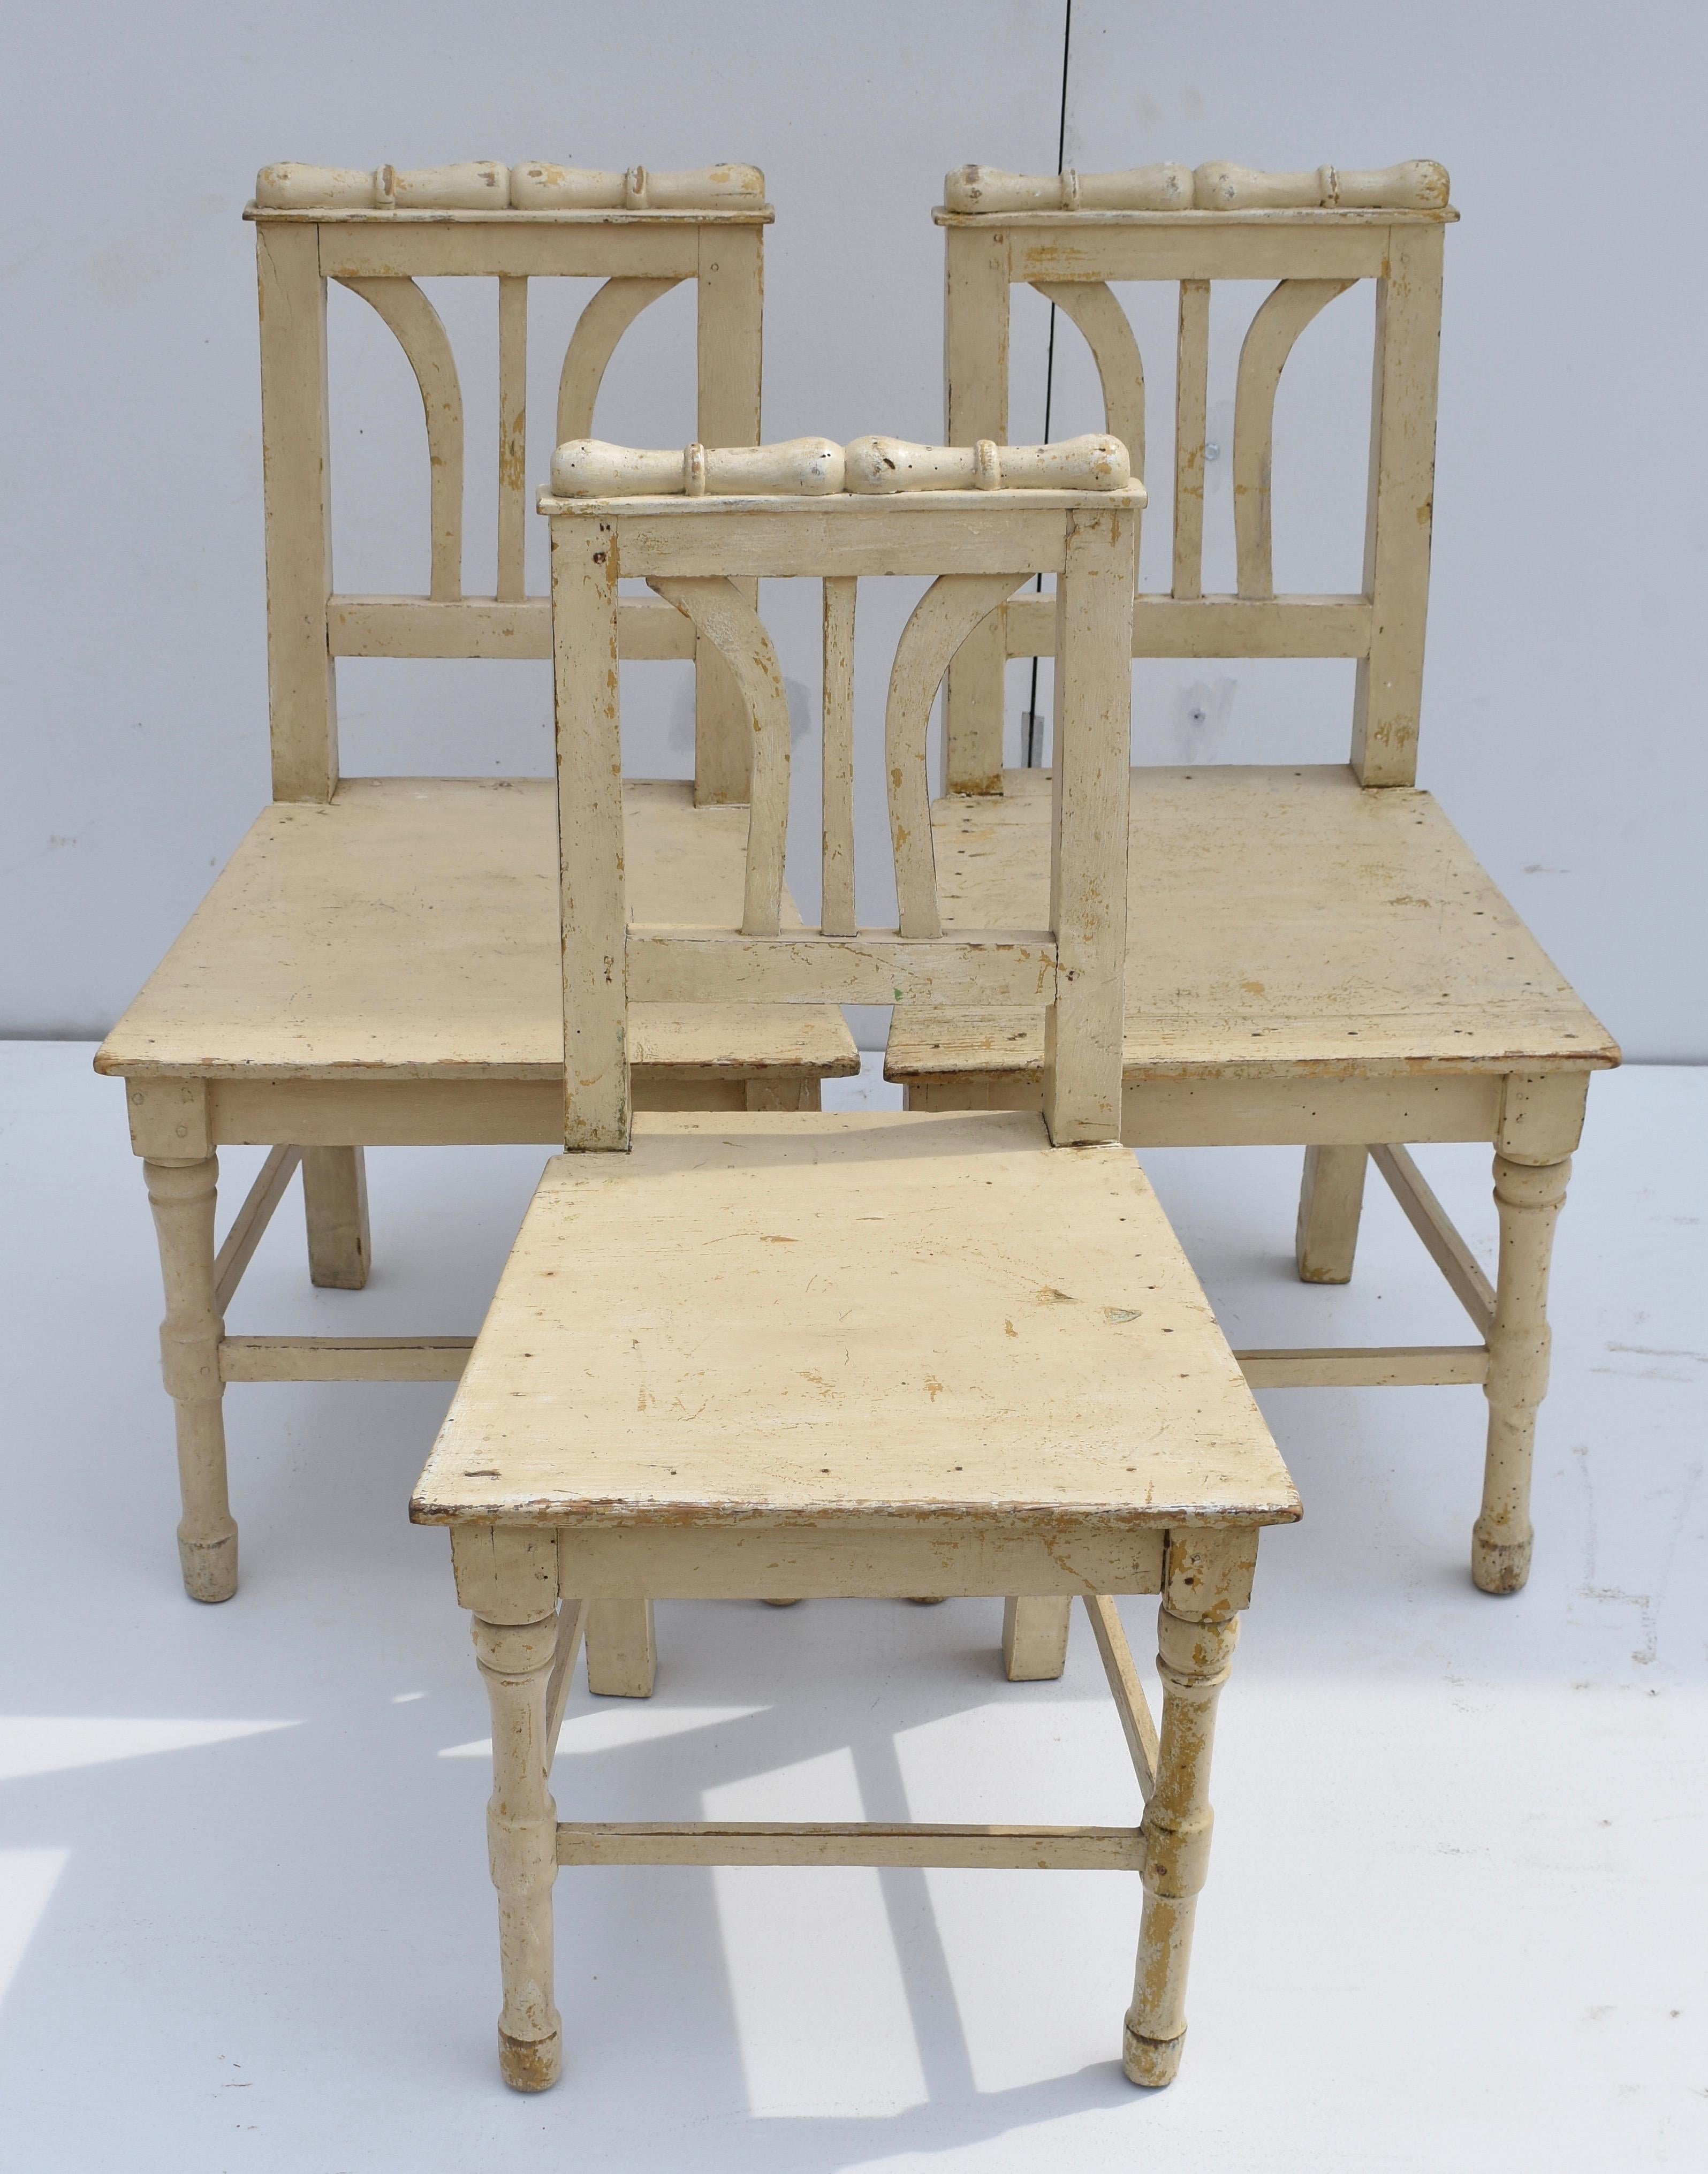 These delightful plank seat children’s chairs are in a rustic Empire style, with a scroll at the top of the back rail and turned legs at the front. In old worn buttermilk paint. Seat height is 14.5